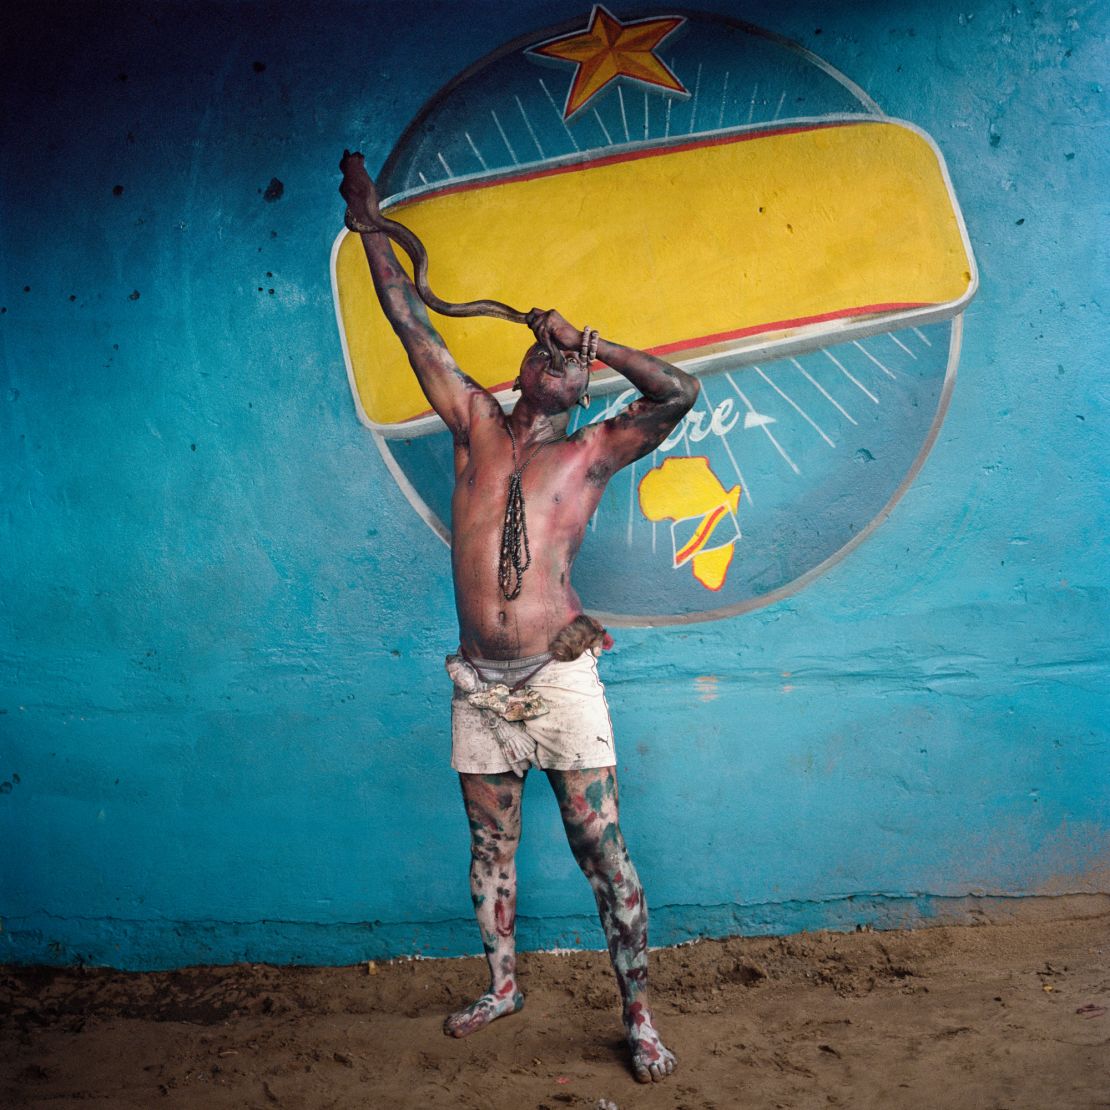 Documentary photographer Colin Delfosse's images of Congolese wrestlers in the capital Kinshasa.